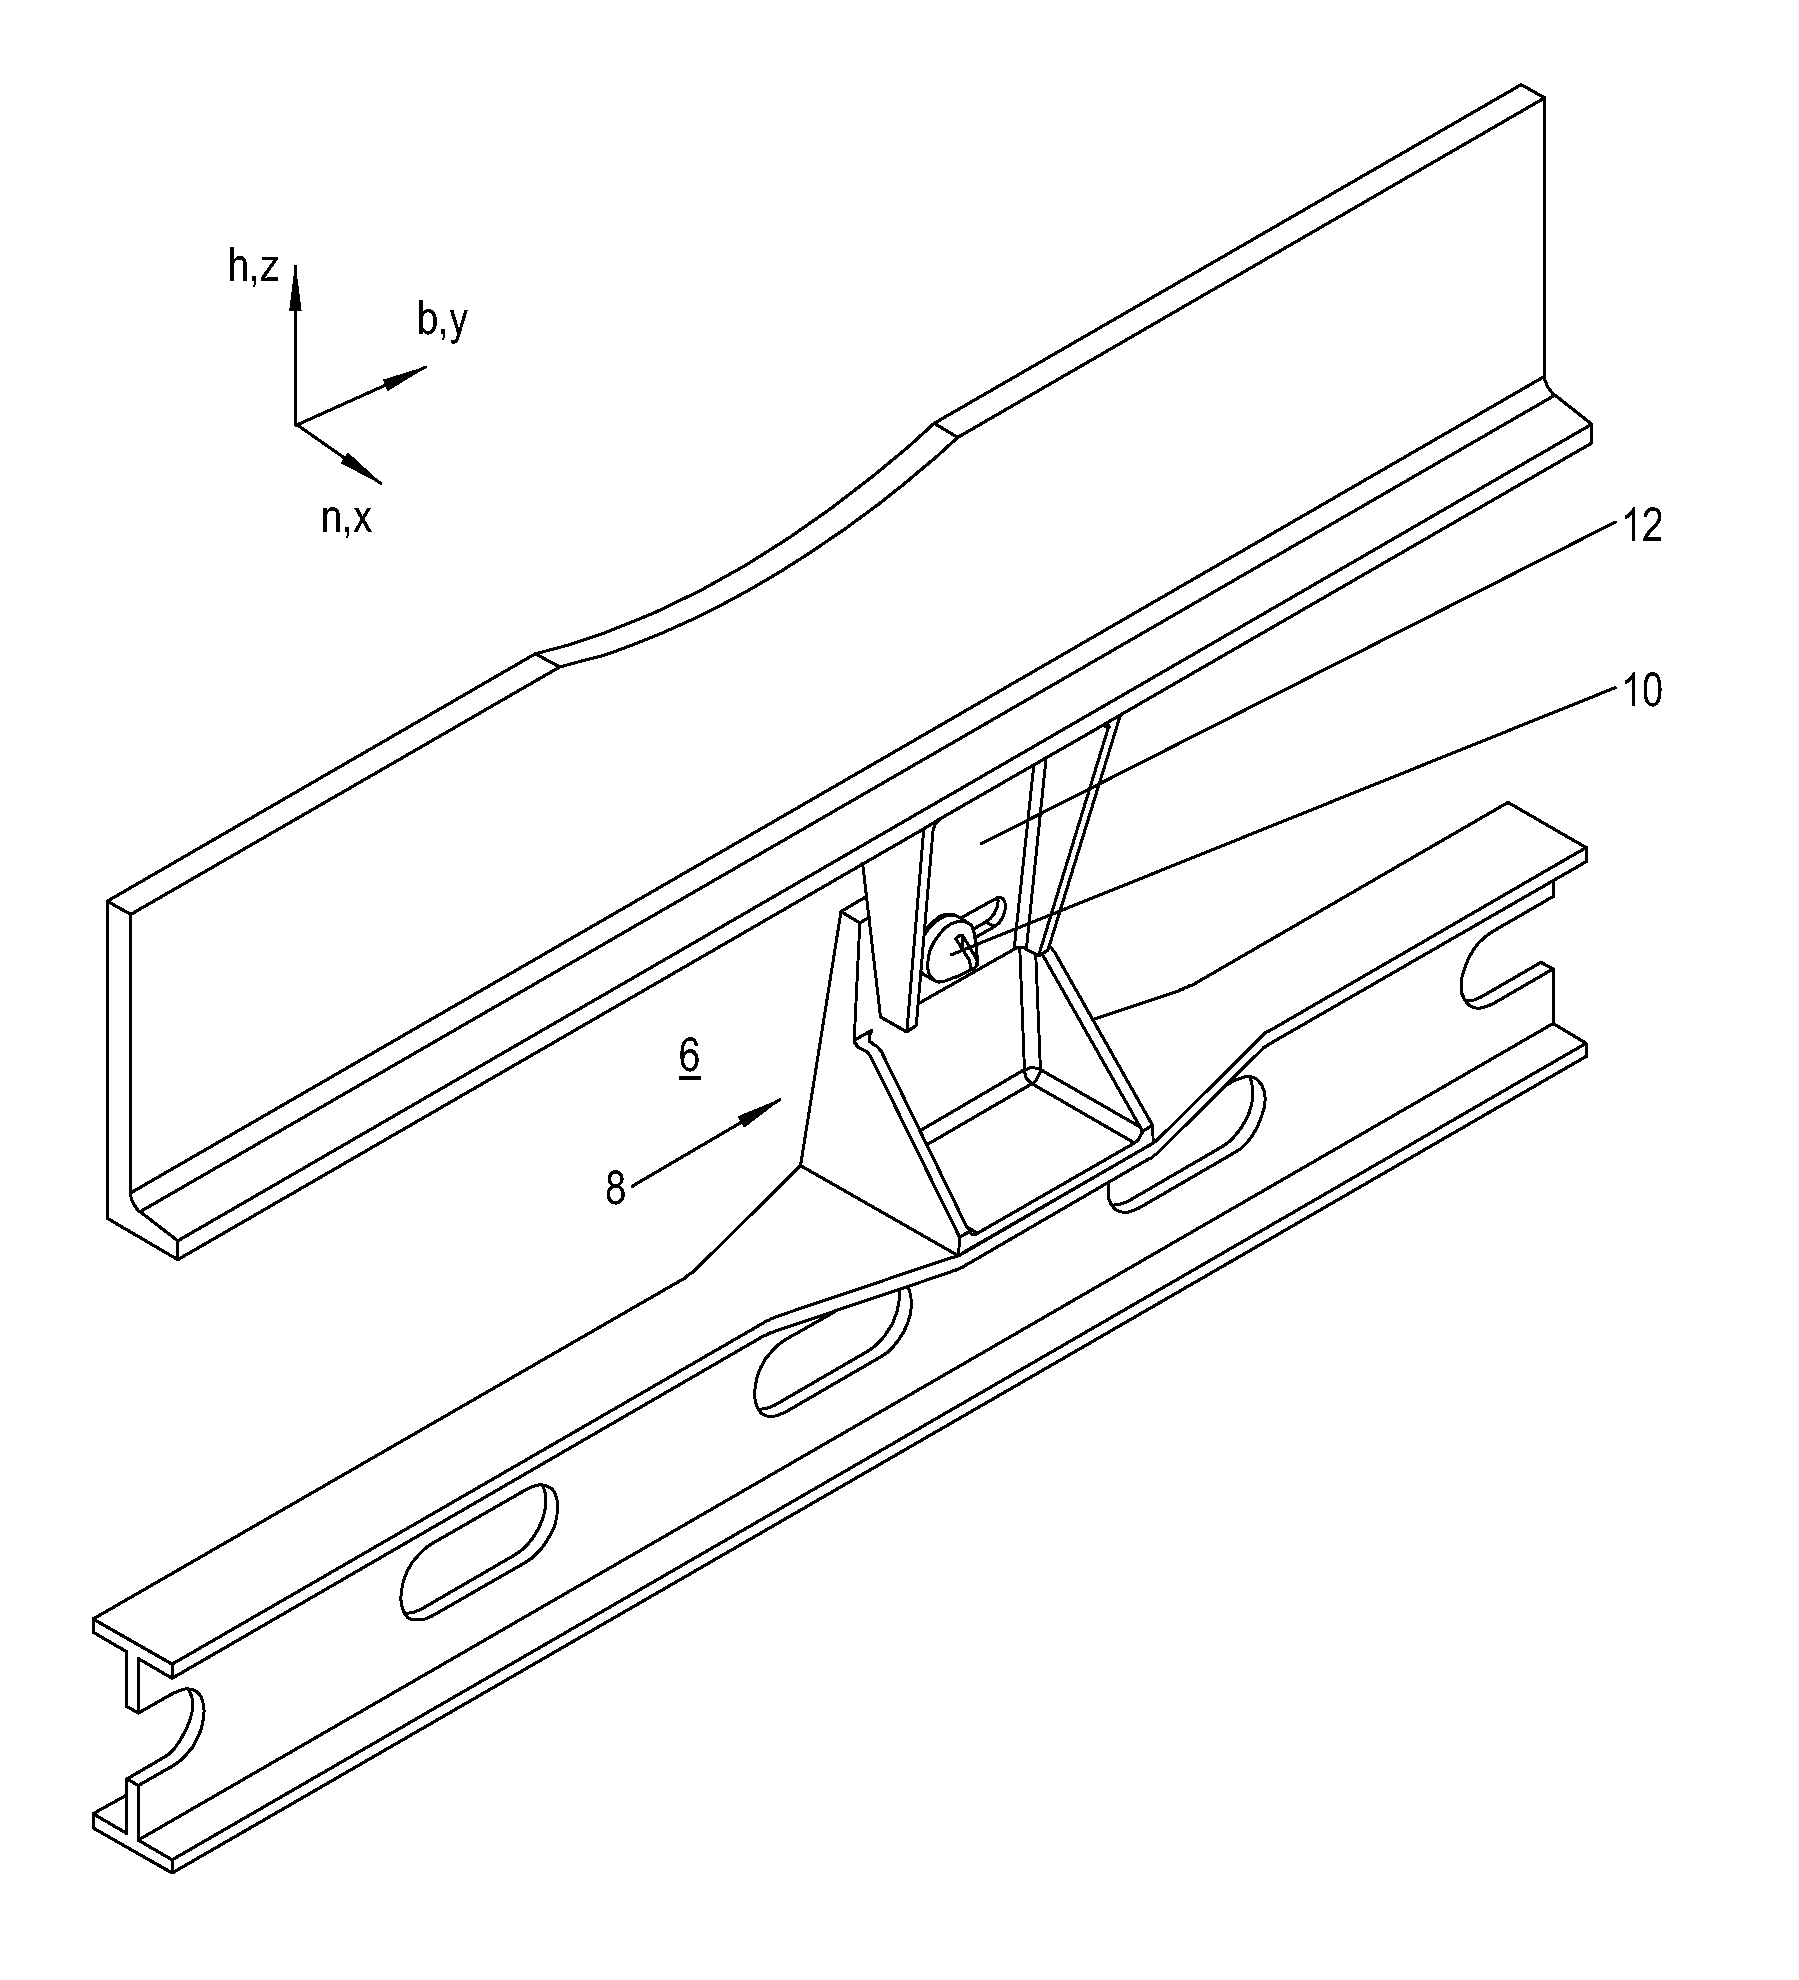 Attachment arrangement, a connecting device, and also a method